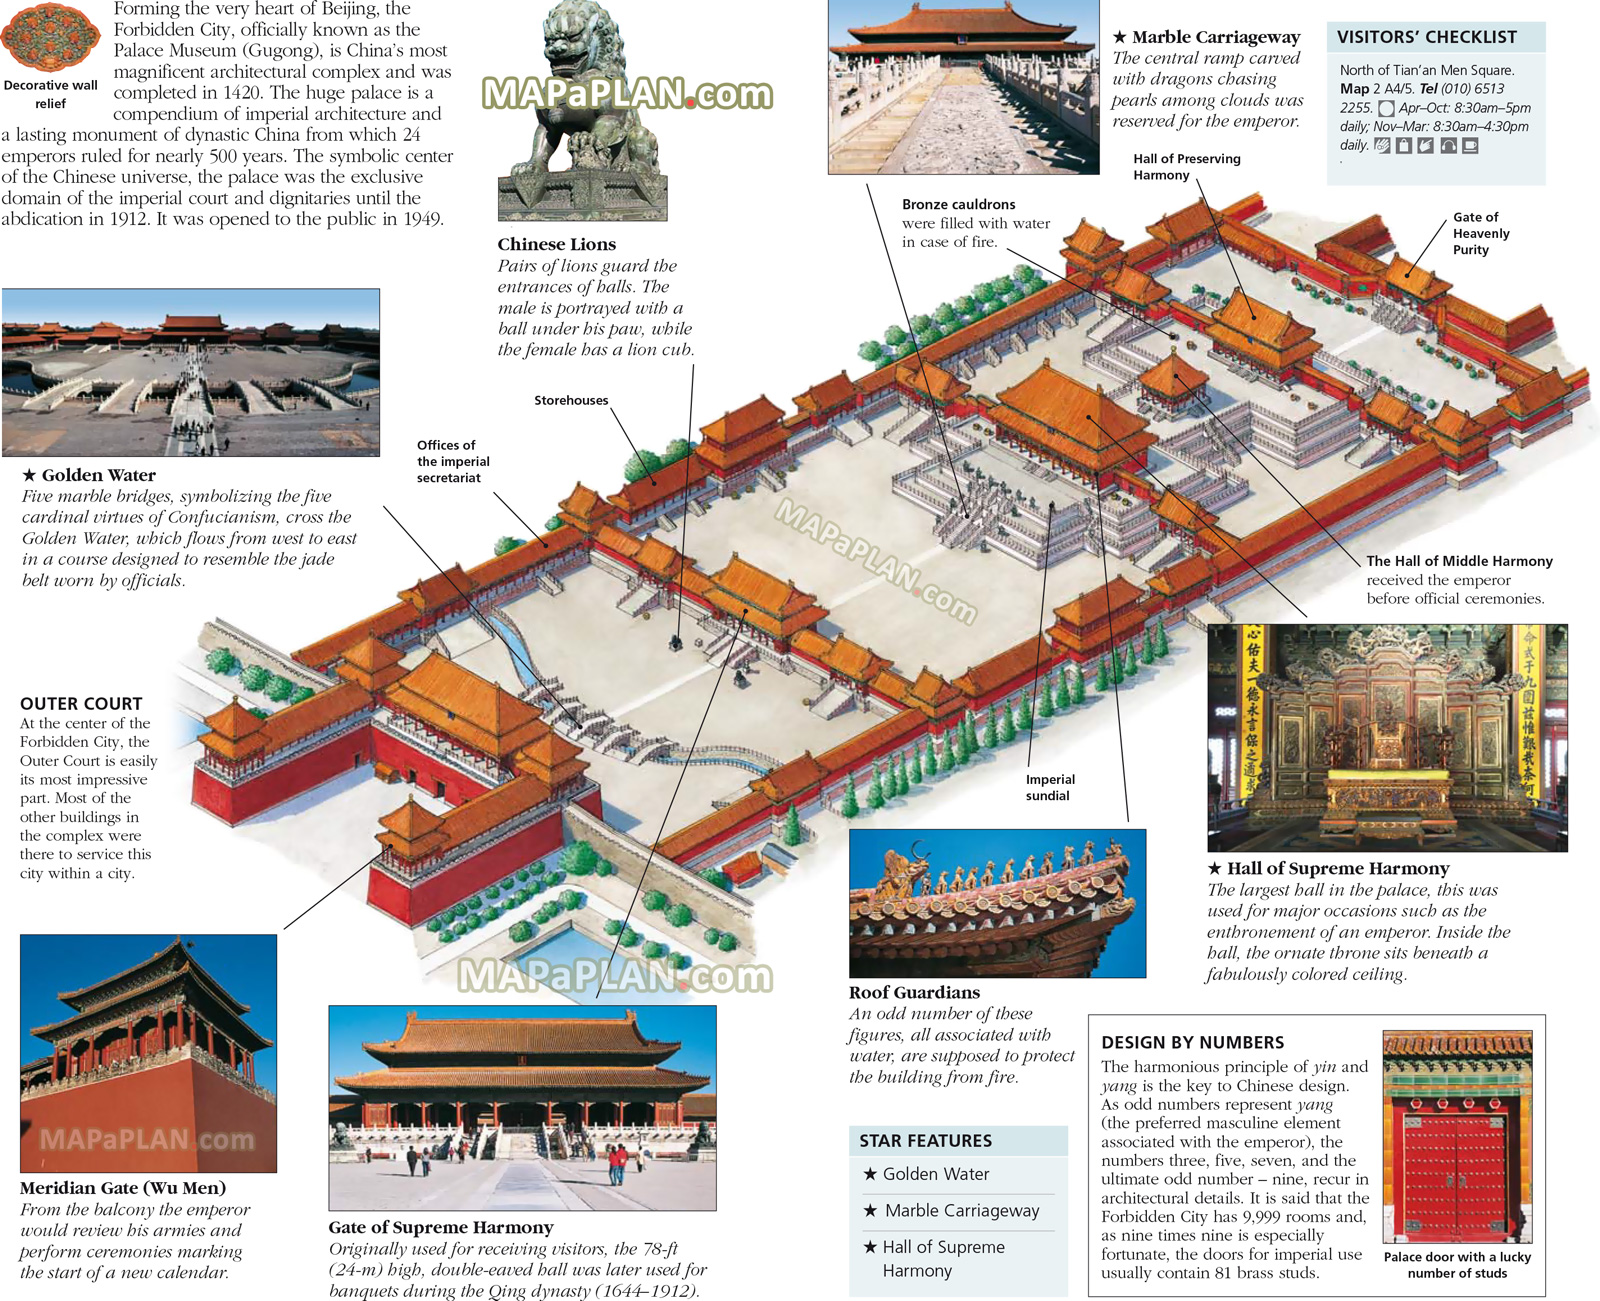 forbidden city old town imperial palace museum ancient art spots historical attractions Beijing top tourist attractions map